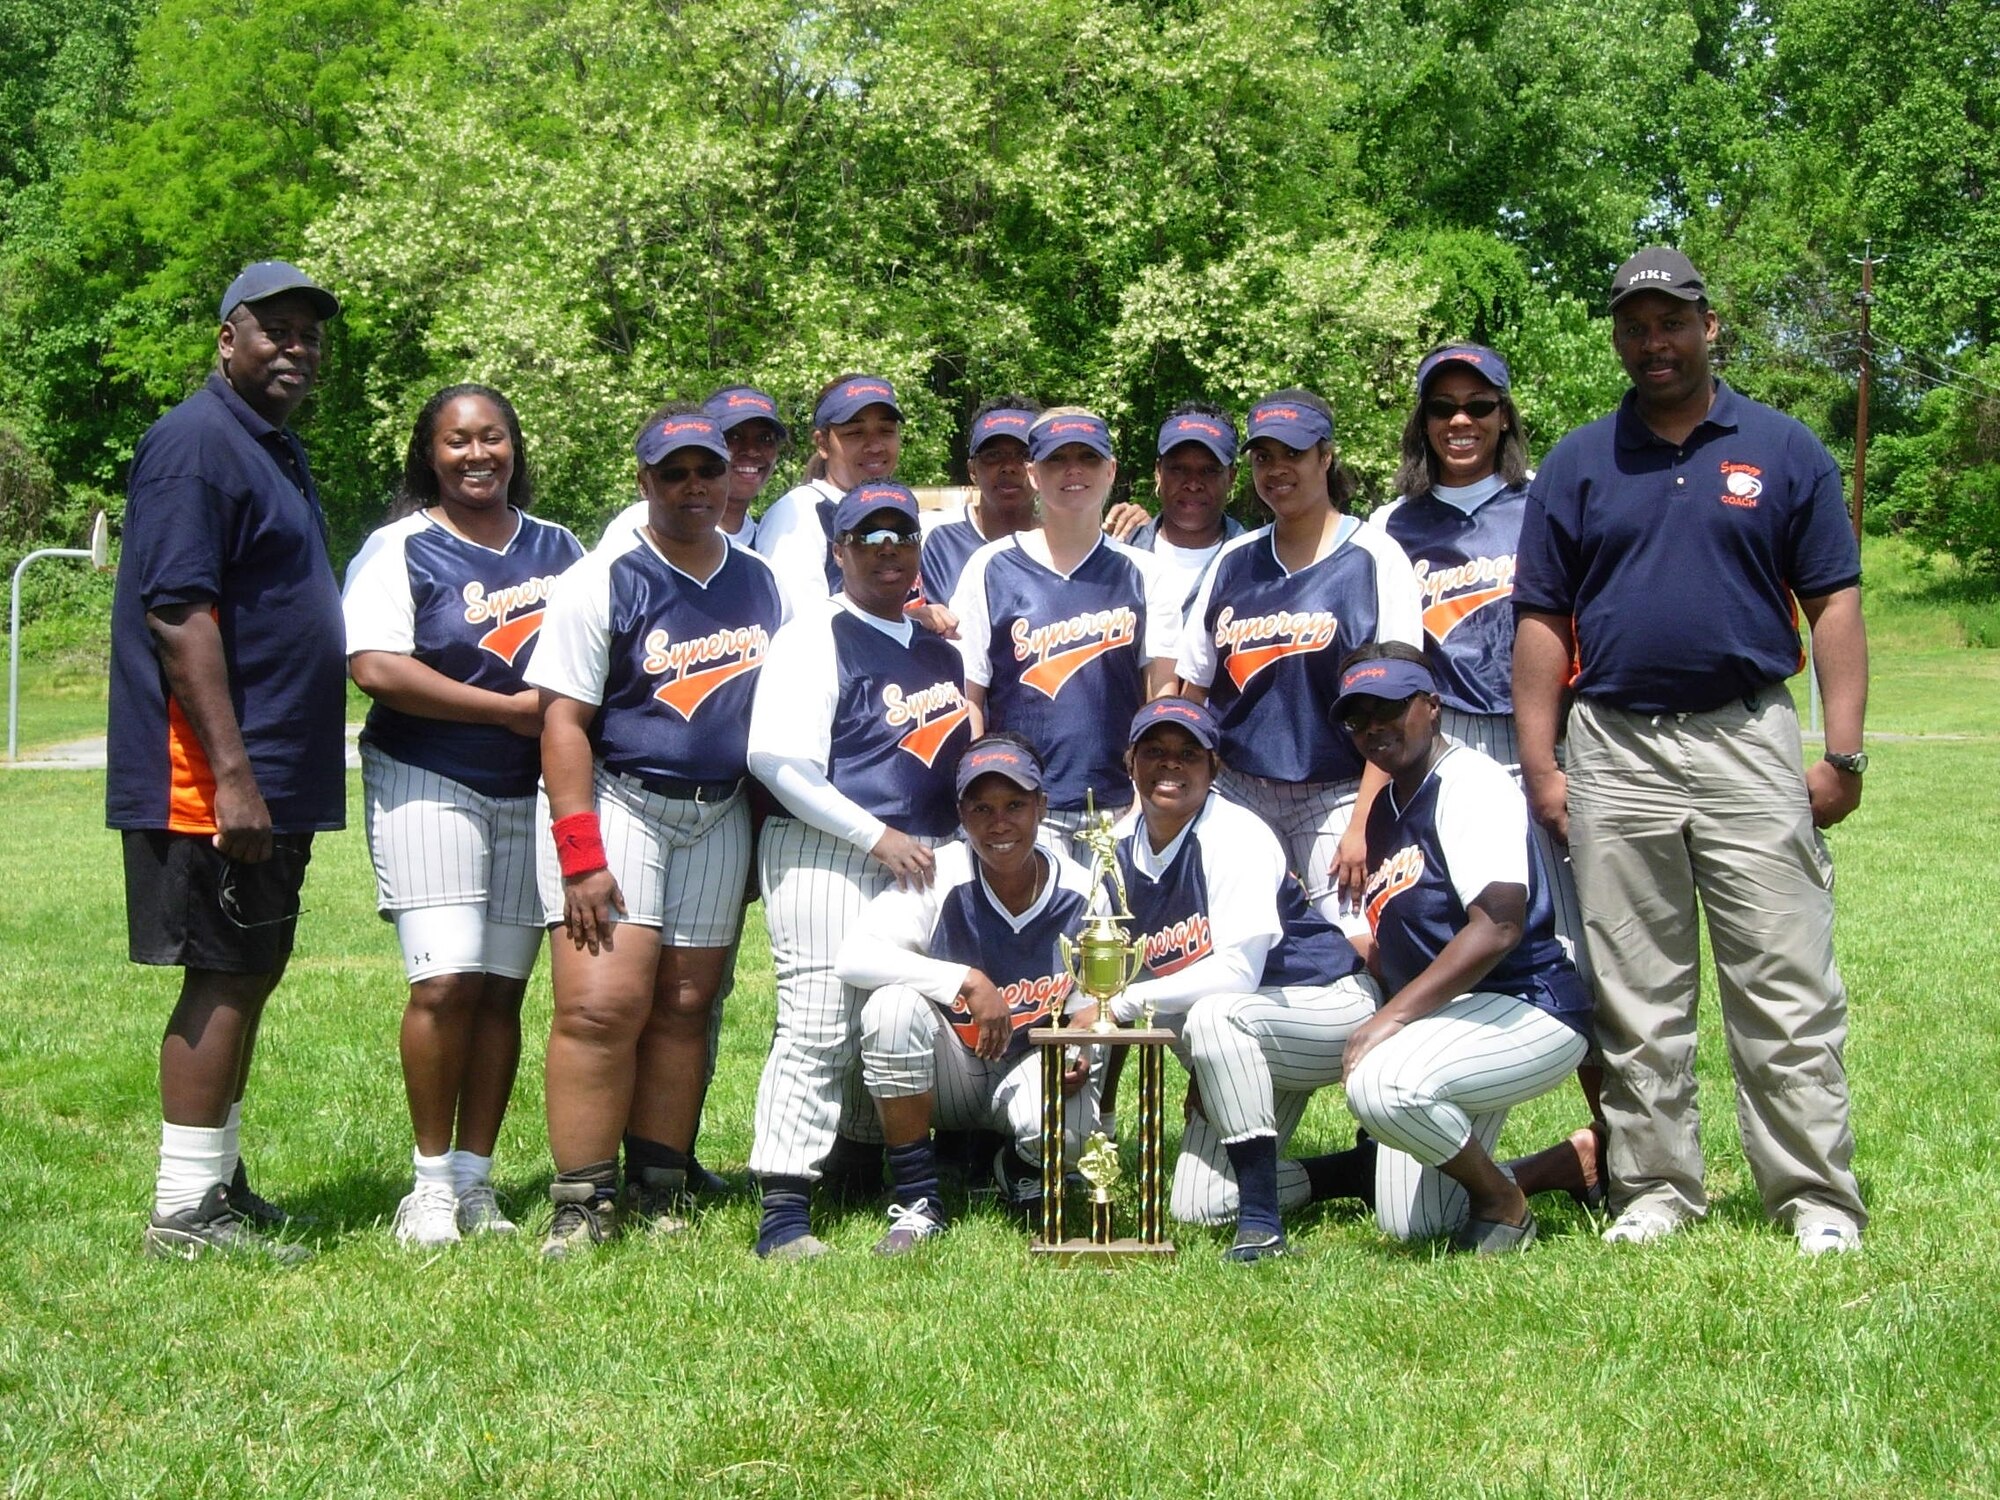 Members of the 459th Air Refueling Wing sponsored softball team, Synergy, pose together with a trophy they earned on May 7.  Synergy earned the second place trophy in the Walter Reed's Womens Classic.  Fort Myer took first place.  The 459th Air Refueling Wing is an Air Force Reserve Command unit.